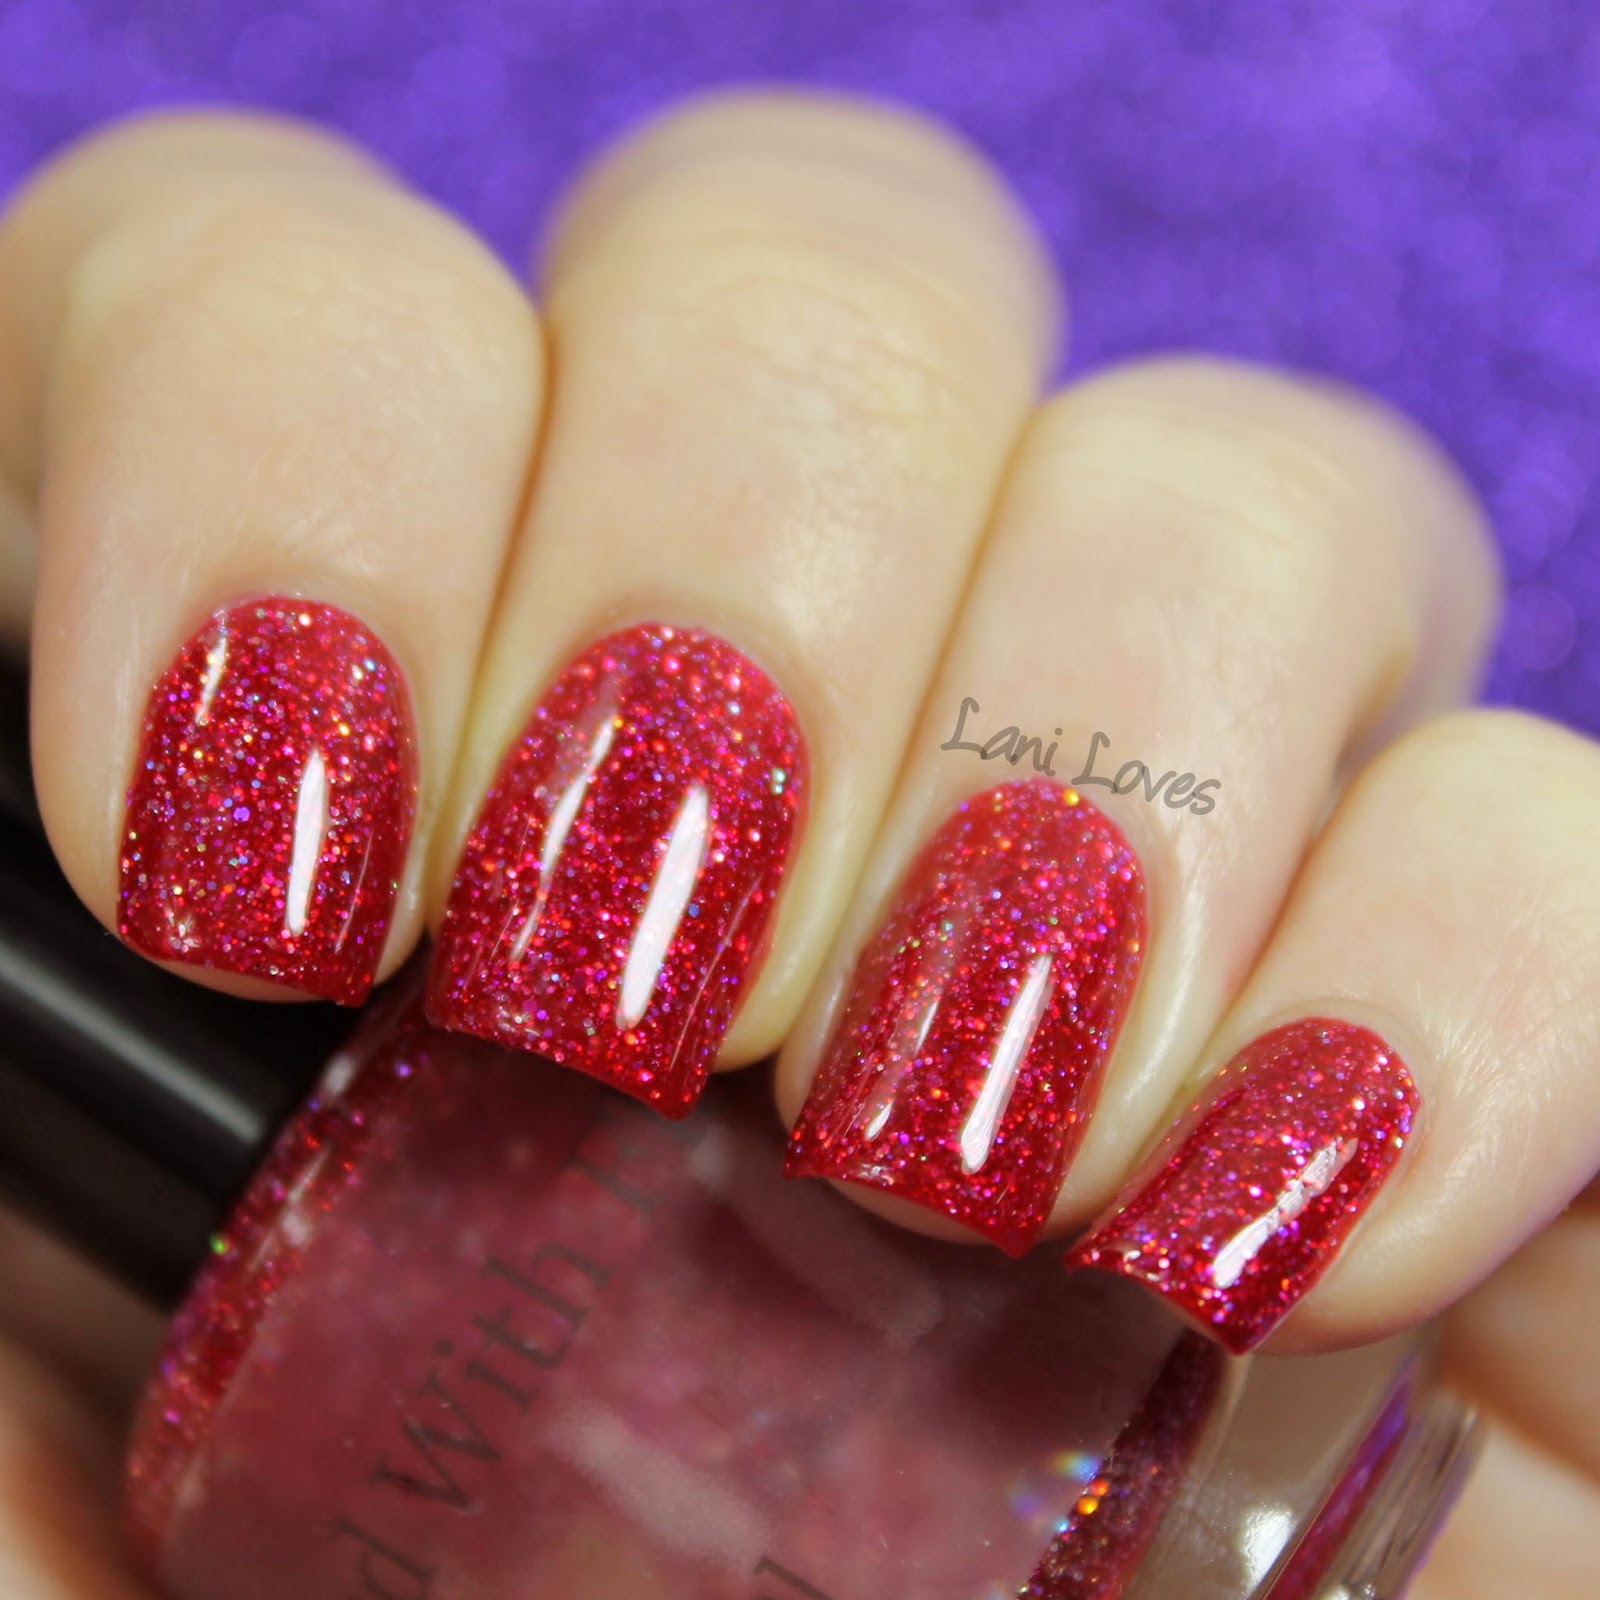 L'Oreal Lifetime Love + Pahlish Pianos Filled With Flames swatch